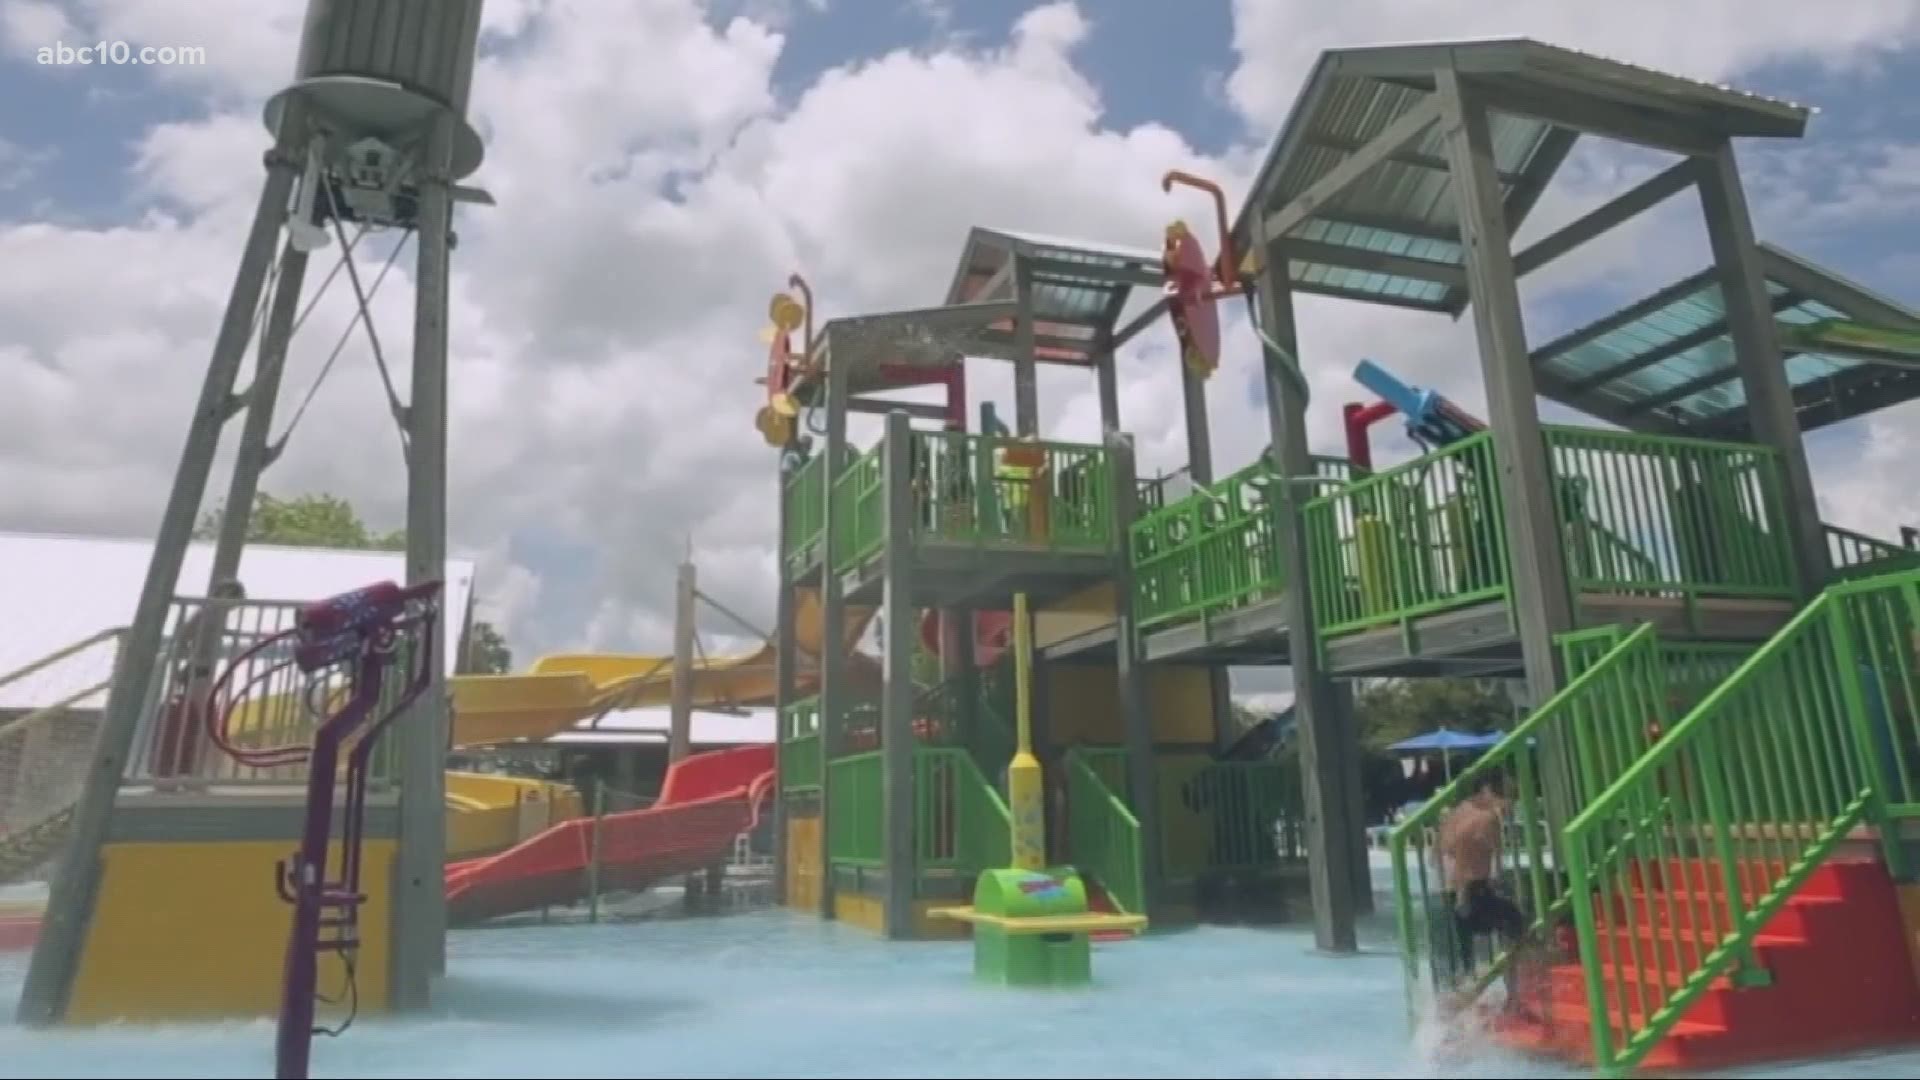 The new waterpark is open with a campground attached.